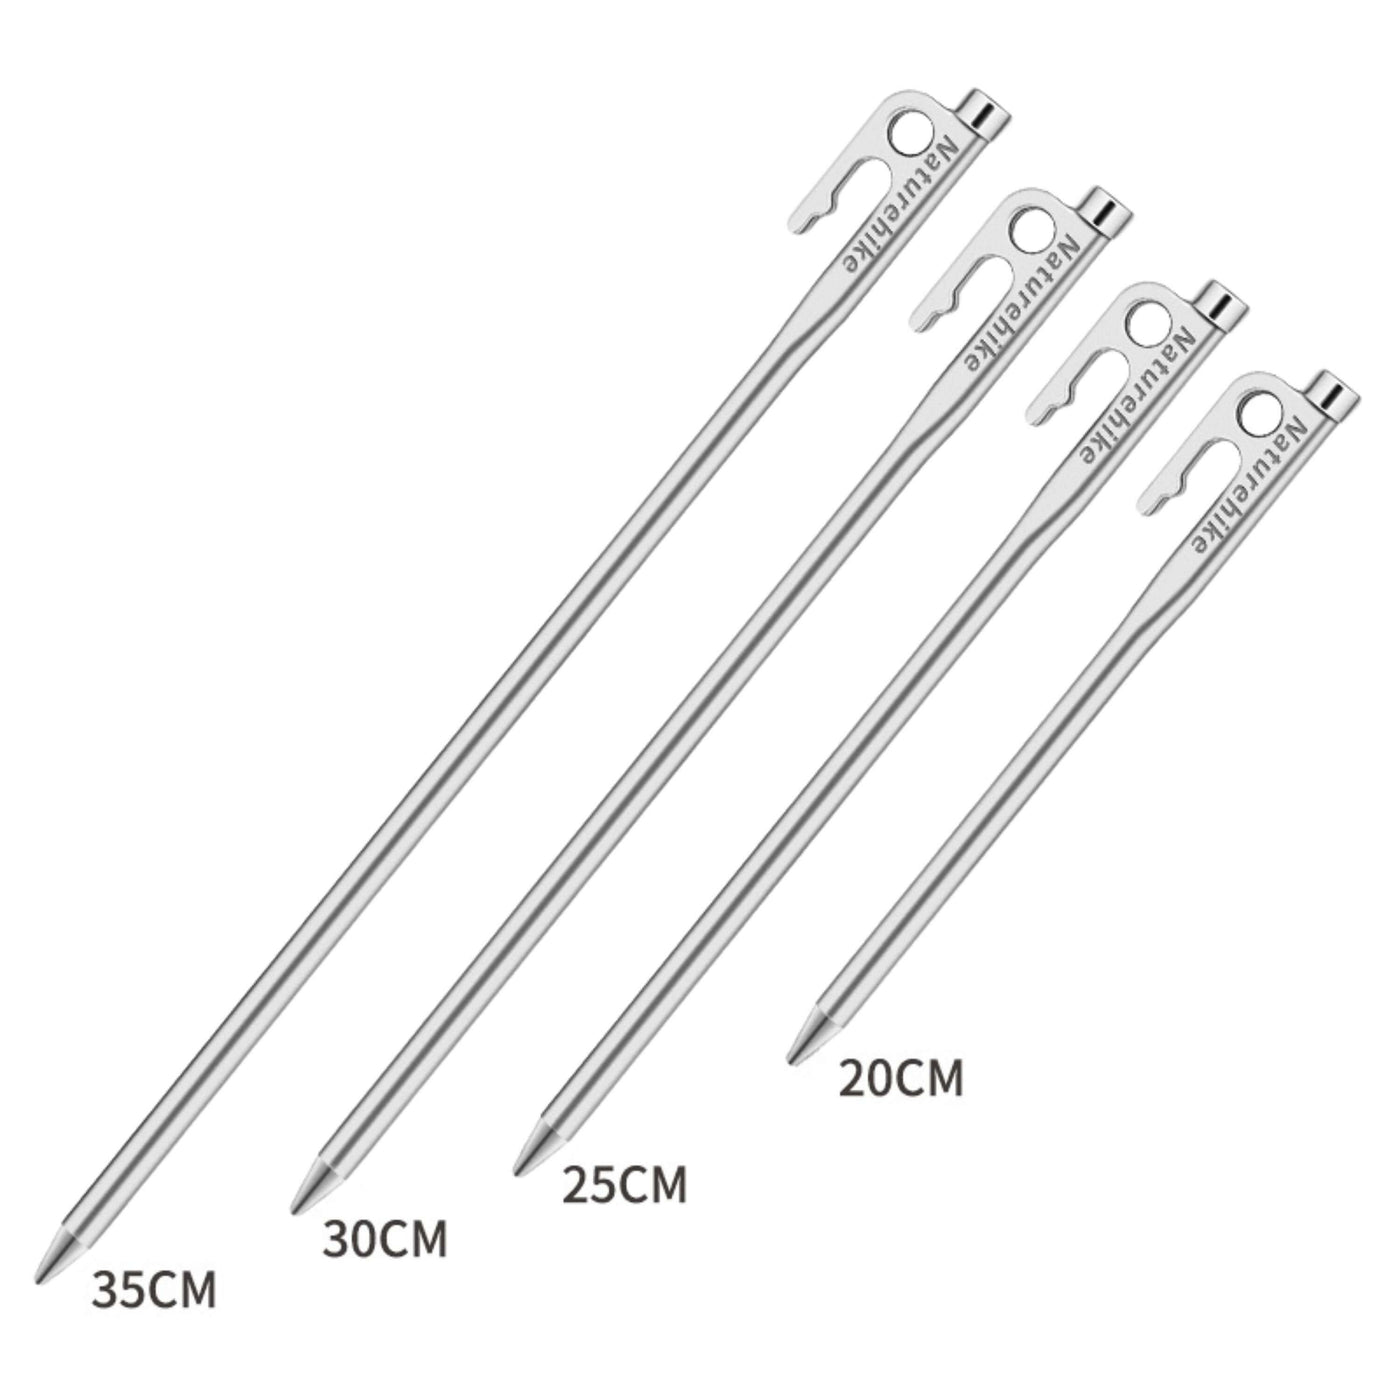 Stainless steel tent pegs